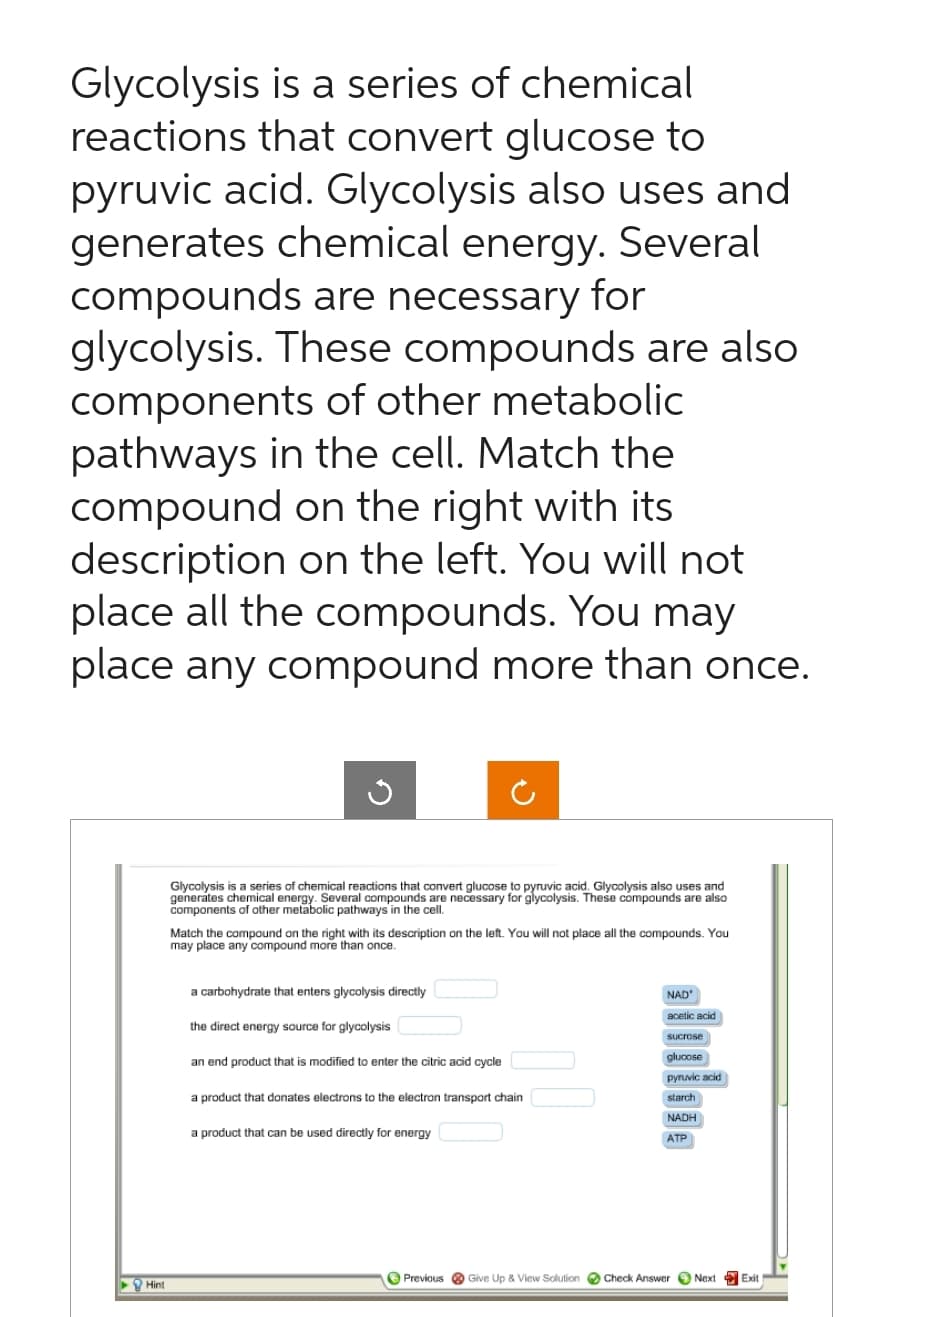 Glycolysis is a series of chemical
reactions that convert glucose to
pyruvic acid. Glycolysis also uses and
generates chemical energy. Several
compounds are necessary for
glycolysis. These compounds are also
components of other metabolic
pathways in the cell. Match the
compound on the right with its
description on the left. You will not
place all the compounds. You may
place any compound more than once.
Hint
Glycolysis is a series of chemical reactions that convert glucose to pyruvic acid. Glycolysis also uses and
generates chemical energy. Several compounds are necessary for glycolysis. These compounds are also
components of other metabolic pathways in the cell.
Match the compound on the right with its description on the left. You will not place all the compounds. You
may place any compound more than once.
a carbohydrate that enters glycolysis directly
the direct energy source for glycolysis
an end product that is modified to enter the citric acid cycle
a product that donates electrons to the electron transport chain
a product that can be used directly for energy
NAD
acetic acid
sucrose
glucose
pyruvic acid
starch
NADH
ATP
Previous Give Up & View Solution Check Answer Next Exit